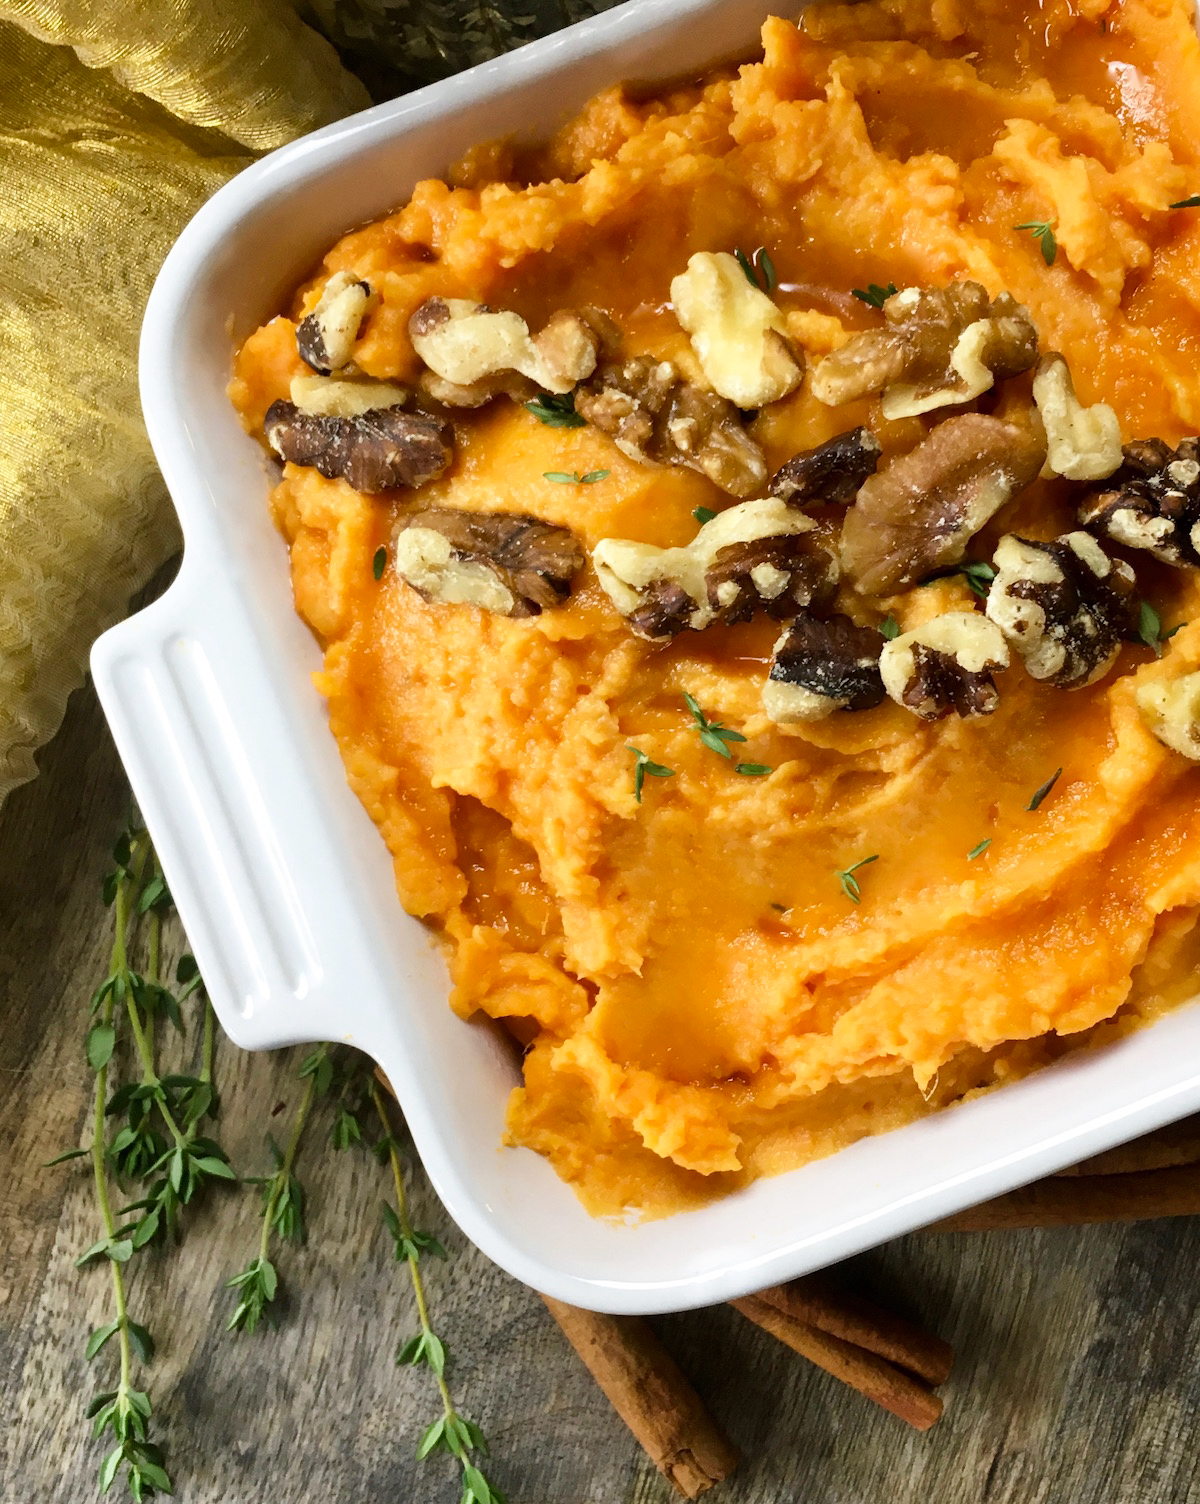 These rich and creamy mashed sweet potatoes are the perfect side dish for just about any holiday meal. However, these savory sweet potatoes so quick and easy to make, you’ll want to enjoy them throughout the year. #Thanksgiving #Christmas #Savory #SideDish